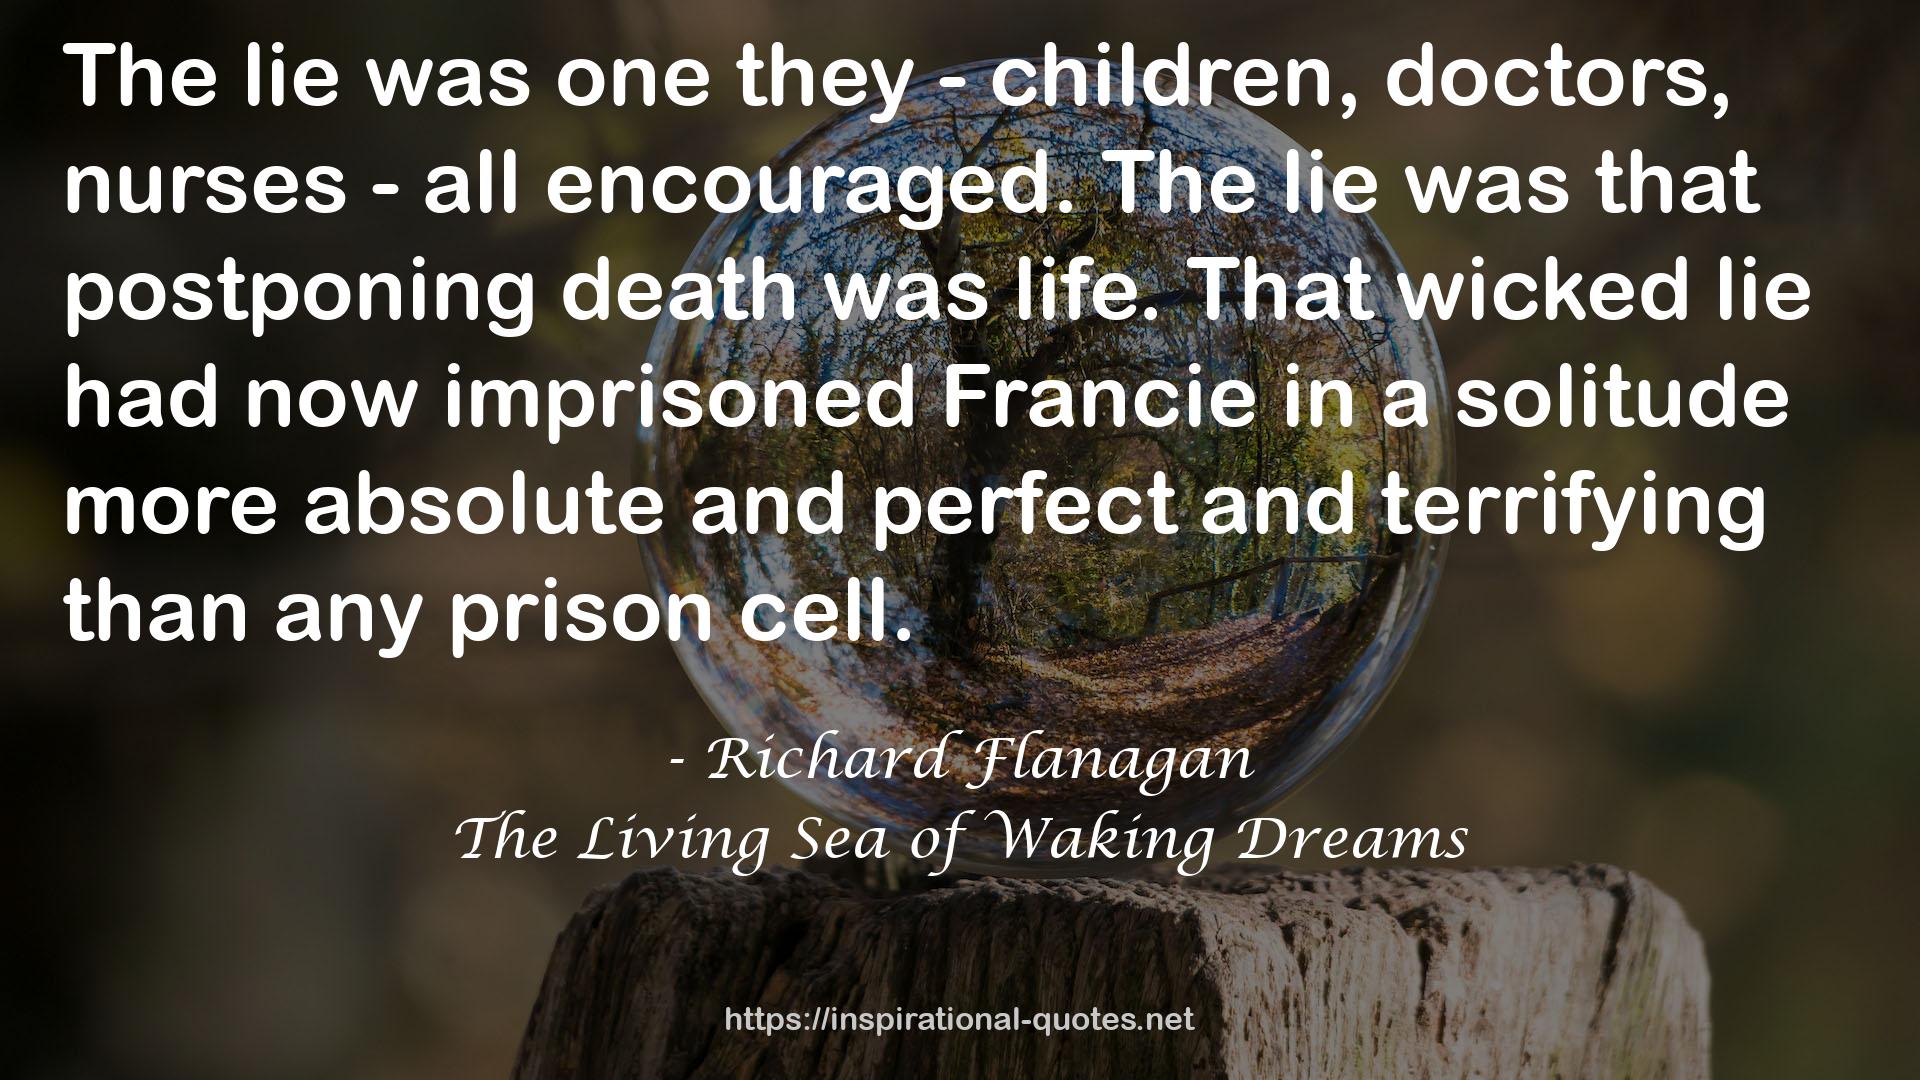 The Living Sea of Waking Dreams QUOTES